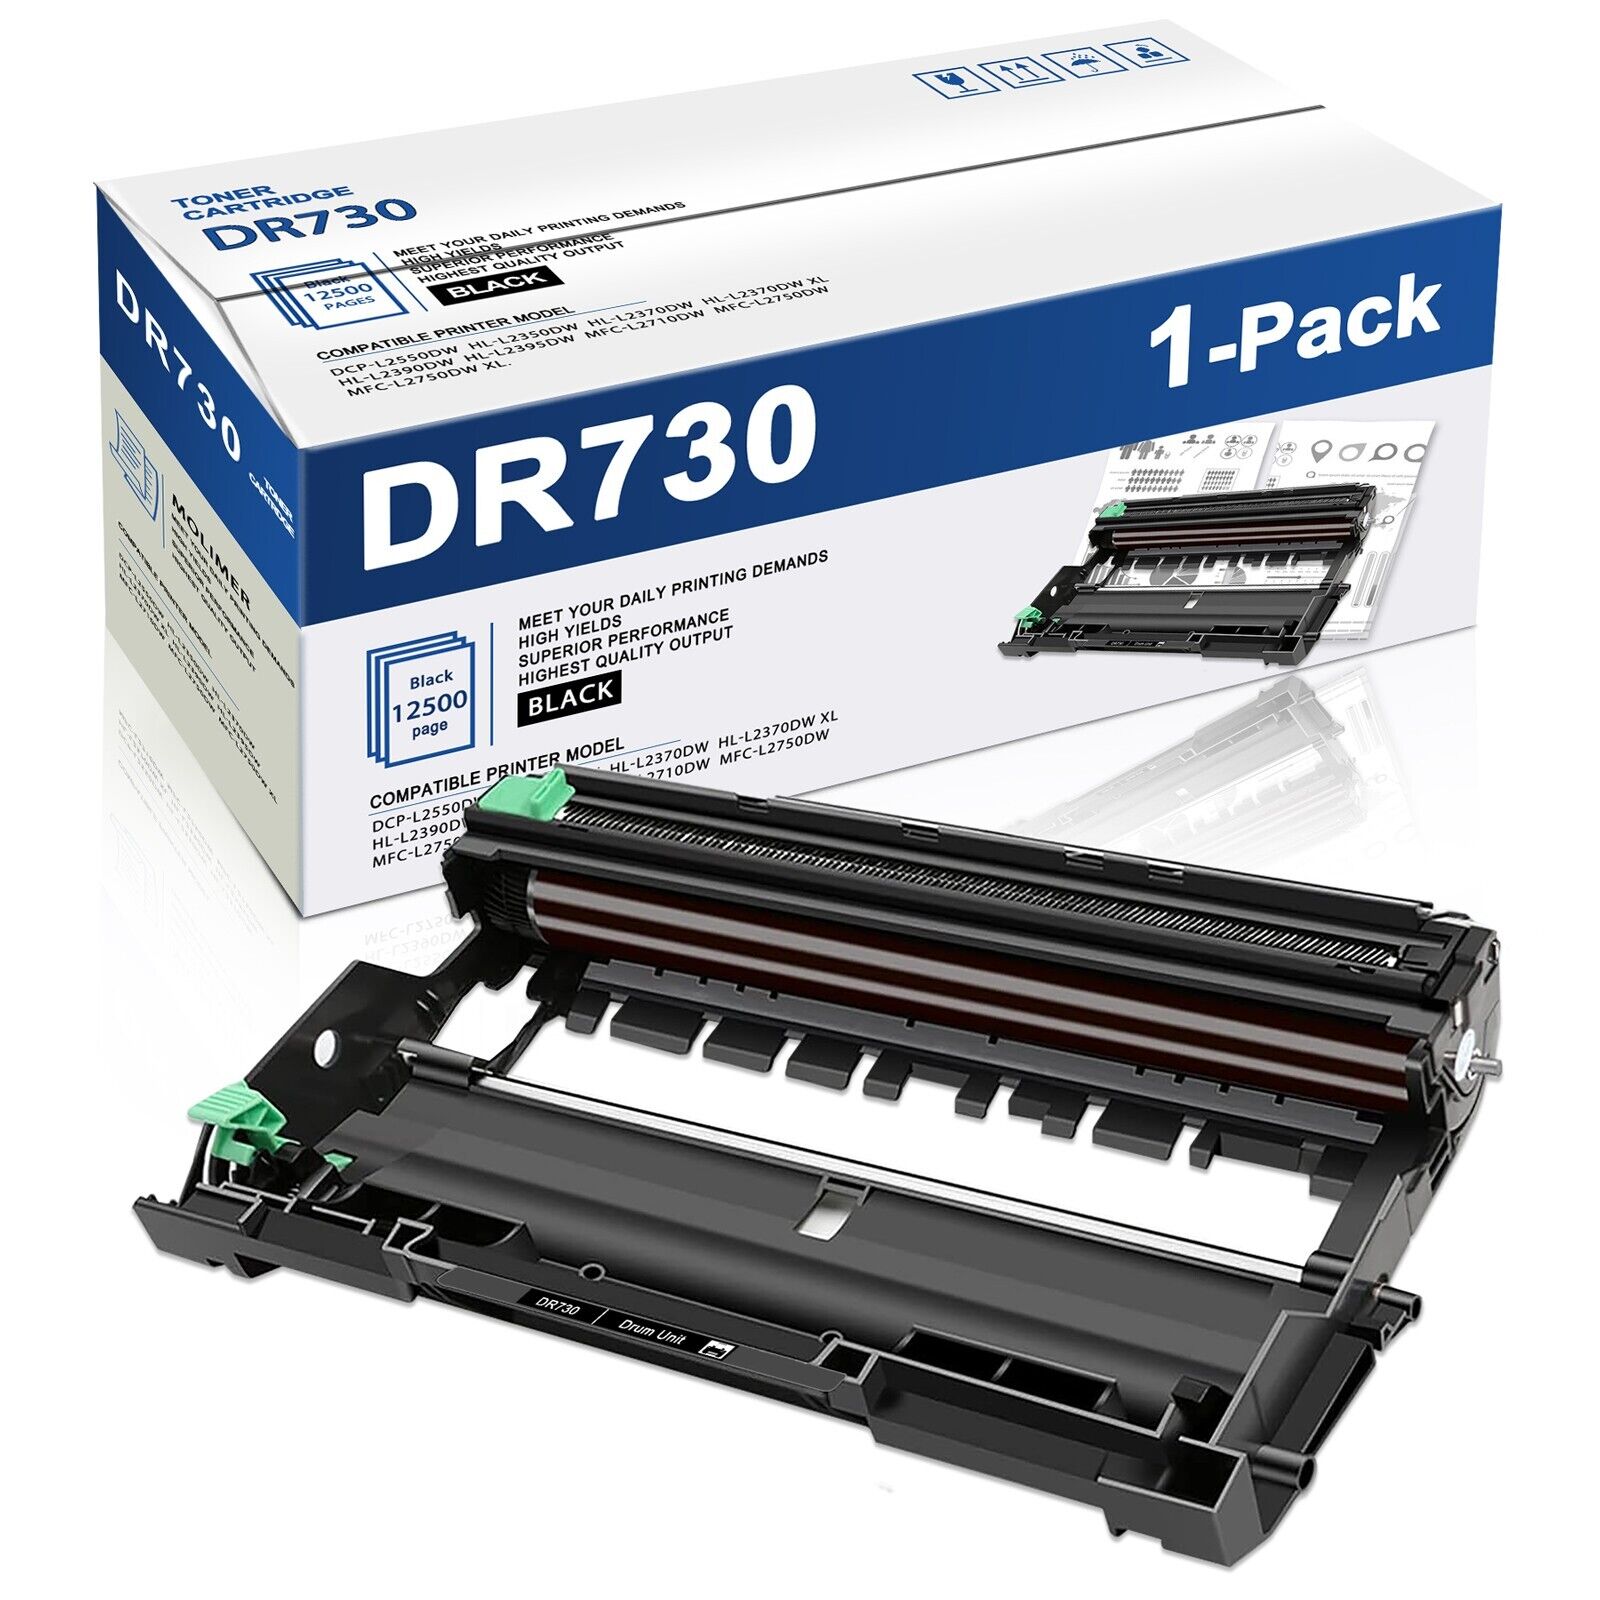 DR730 Drum Unit Replacement for Brother DR730 Compatible with HL-L2350DW Printer